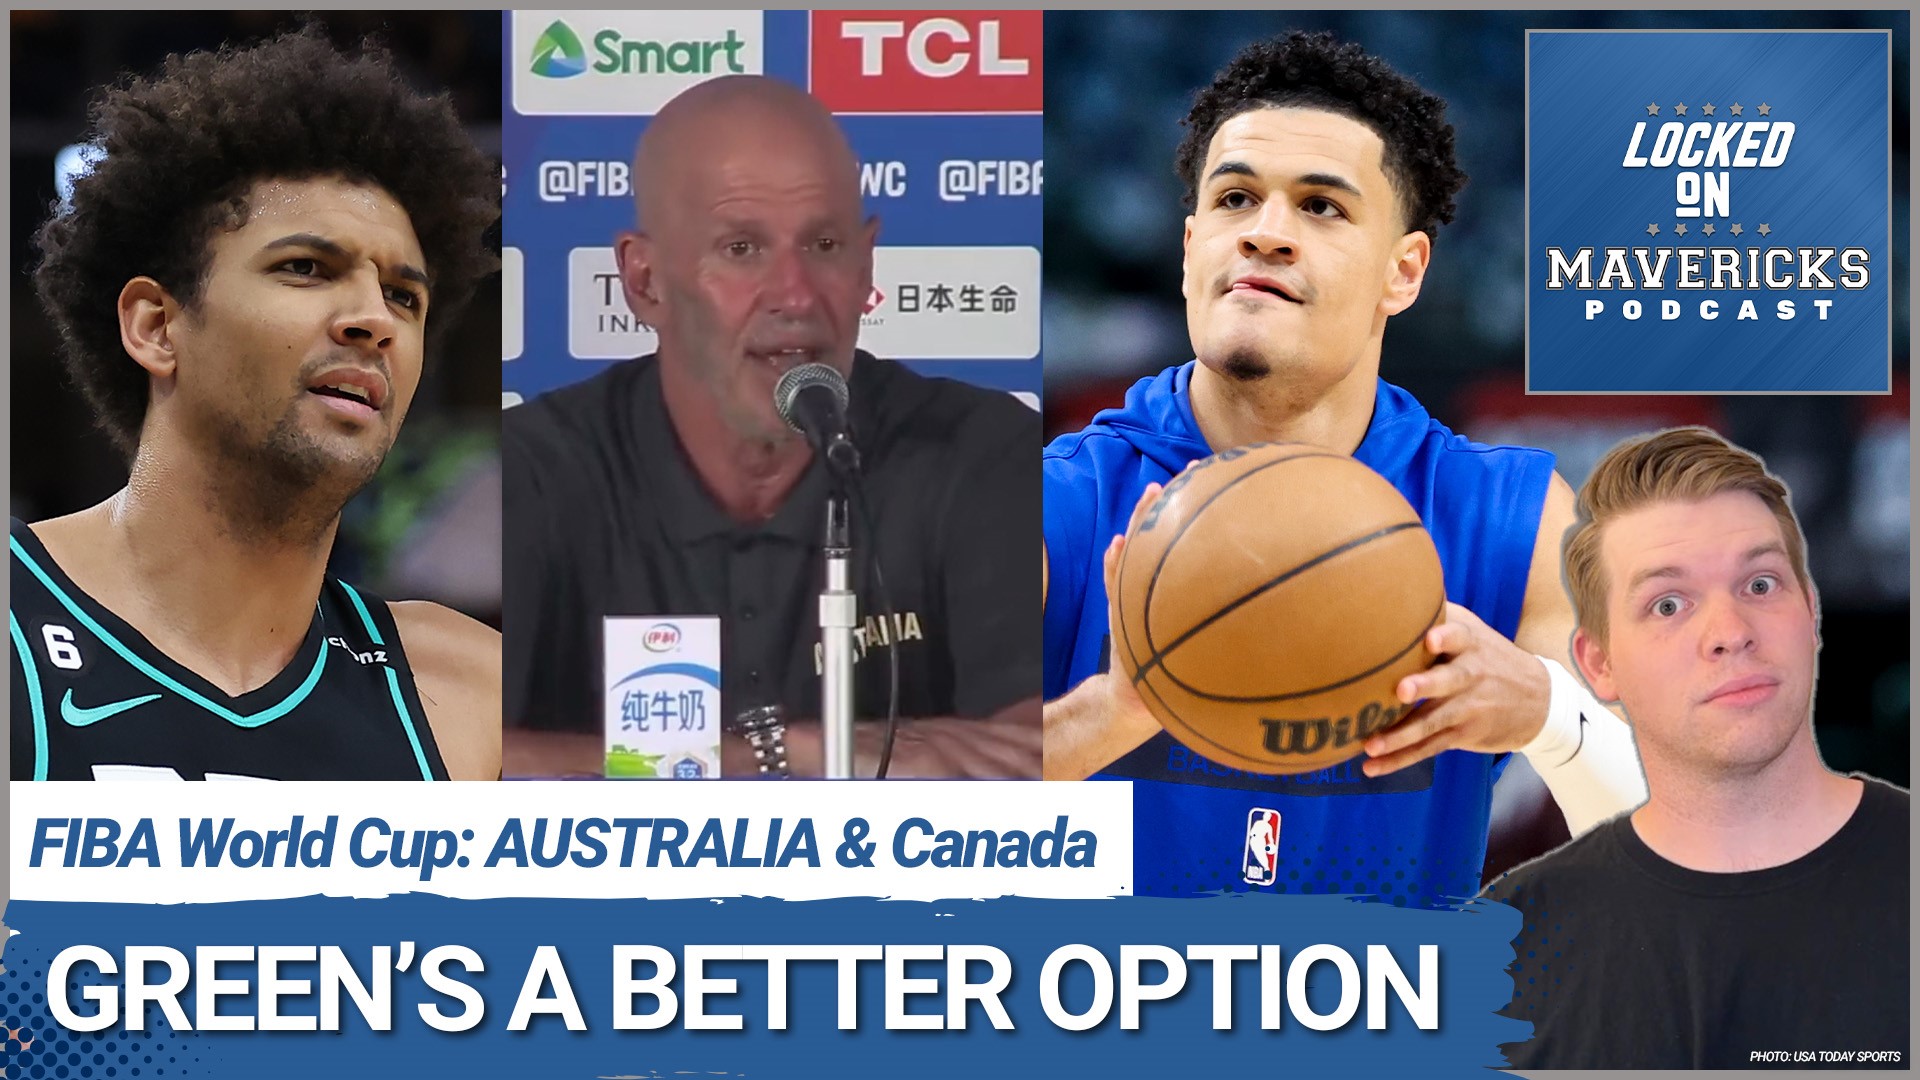 Nick Angstadt explains why Australia's coach said Josh Green is a better option than Matisse Thybulle in the FIBA World Cup and why it's true on the Dallas Mavericks